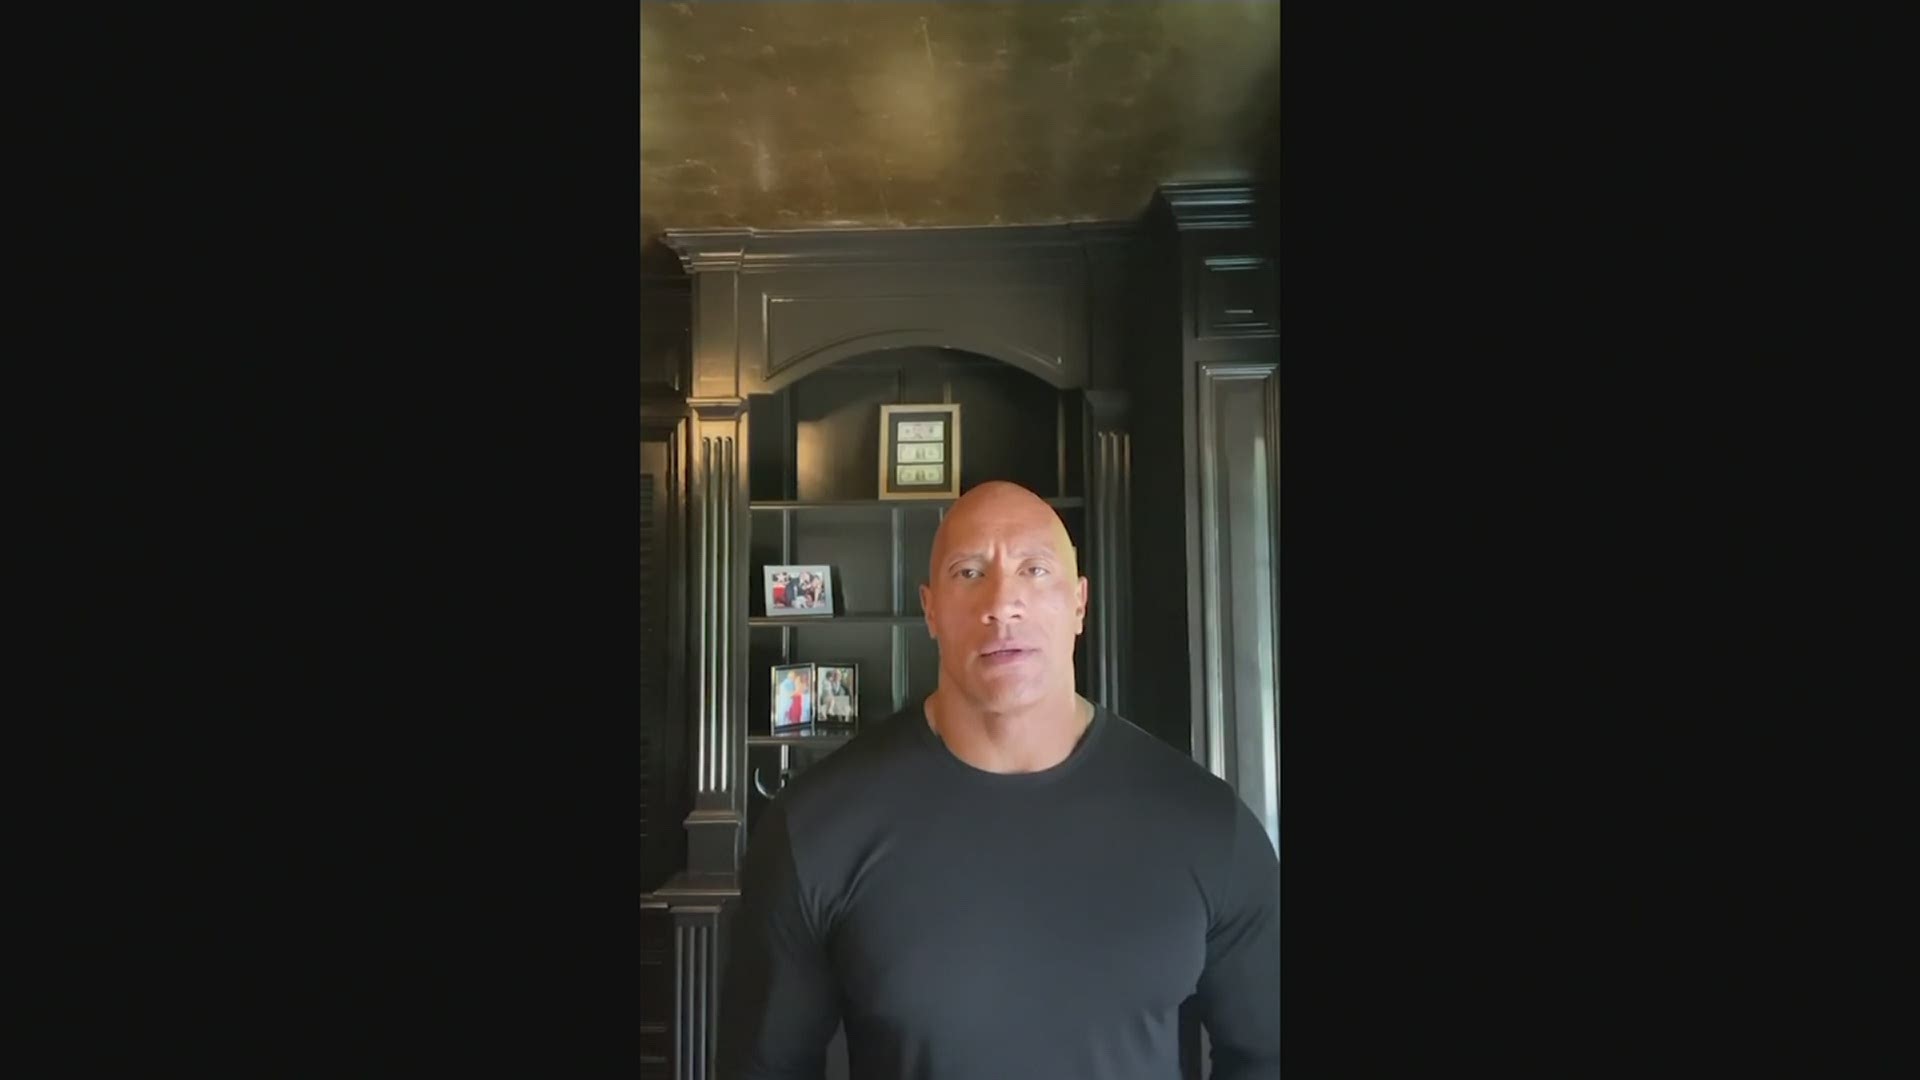 In a video on Instagram, Dwayne "The Rock" Johnson has one question for President Donald Trump: "Where are you?" (via AP)